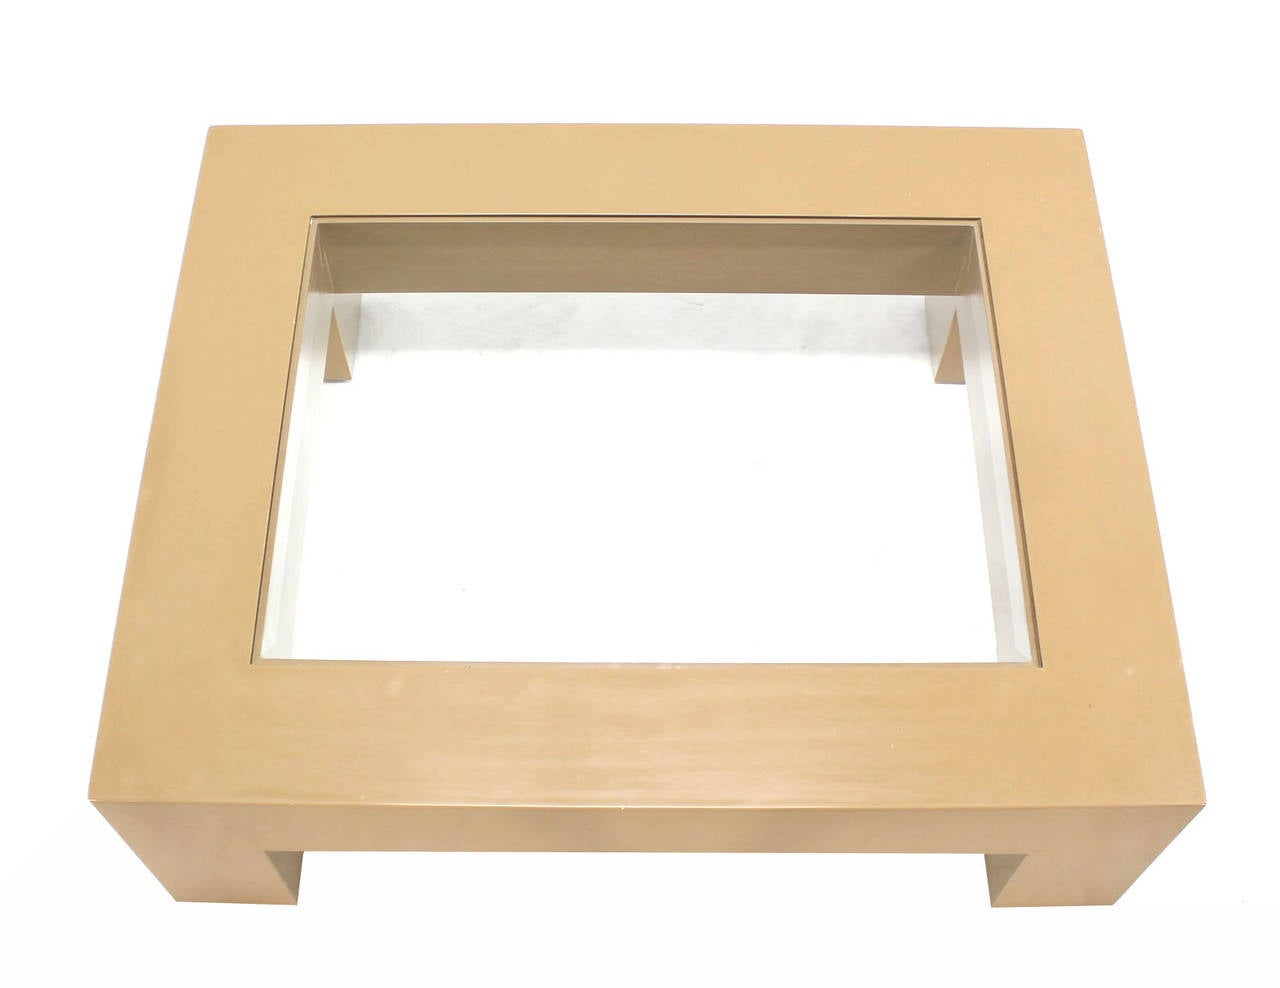 American Geometrical Rectangular Beige Lacquer Base with Glass-Top Coffee Table